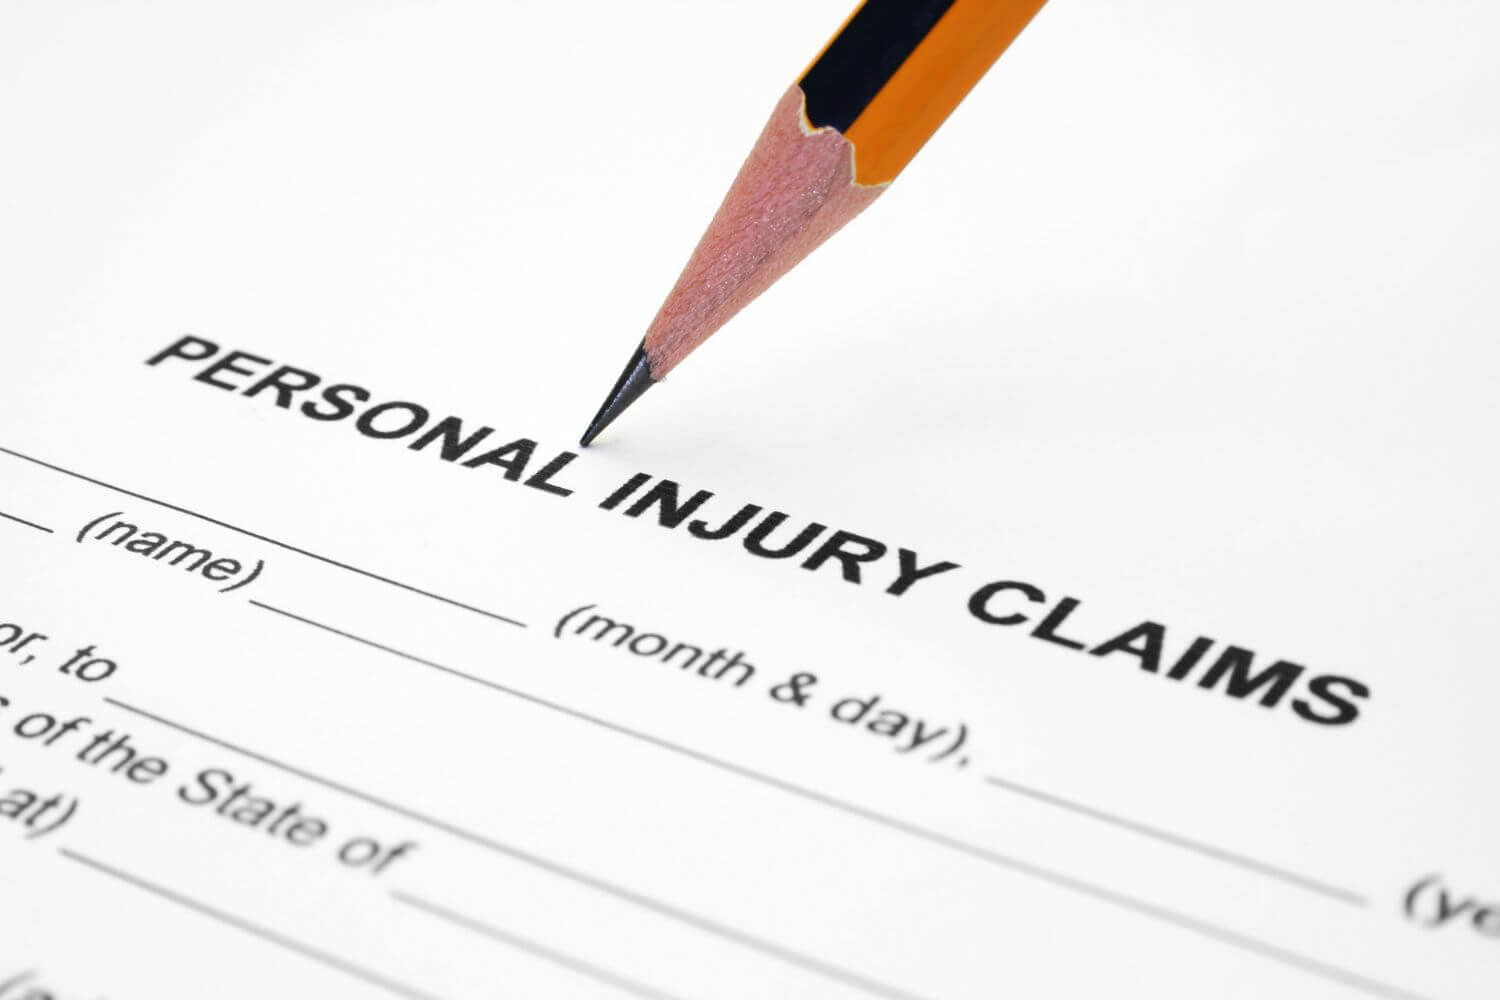 I Have Suffered Financial Losses As A Result Of My Personal Injury Claim. Can I Get This Money Back?